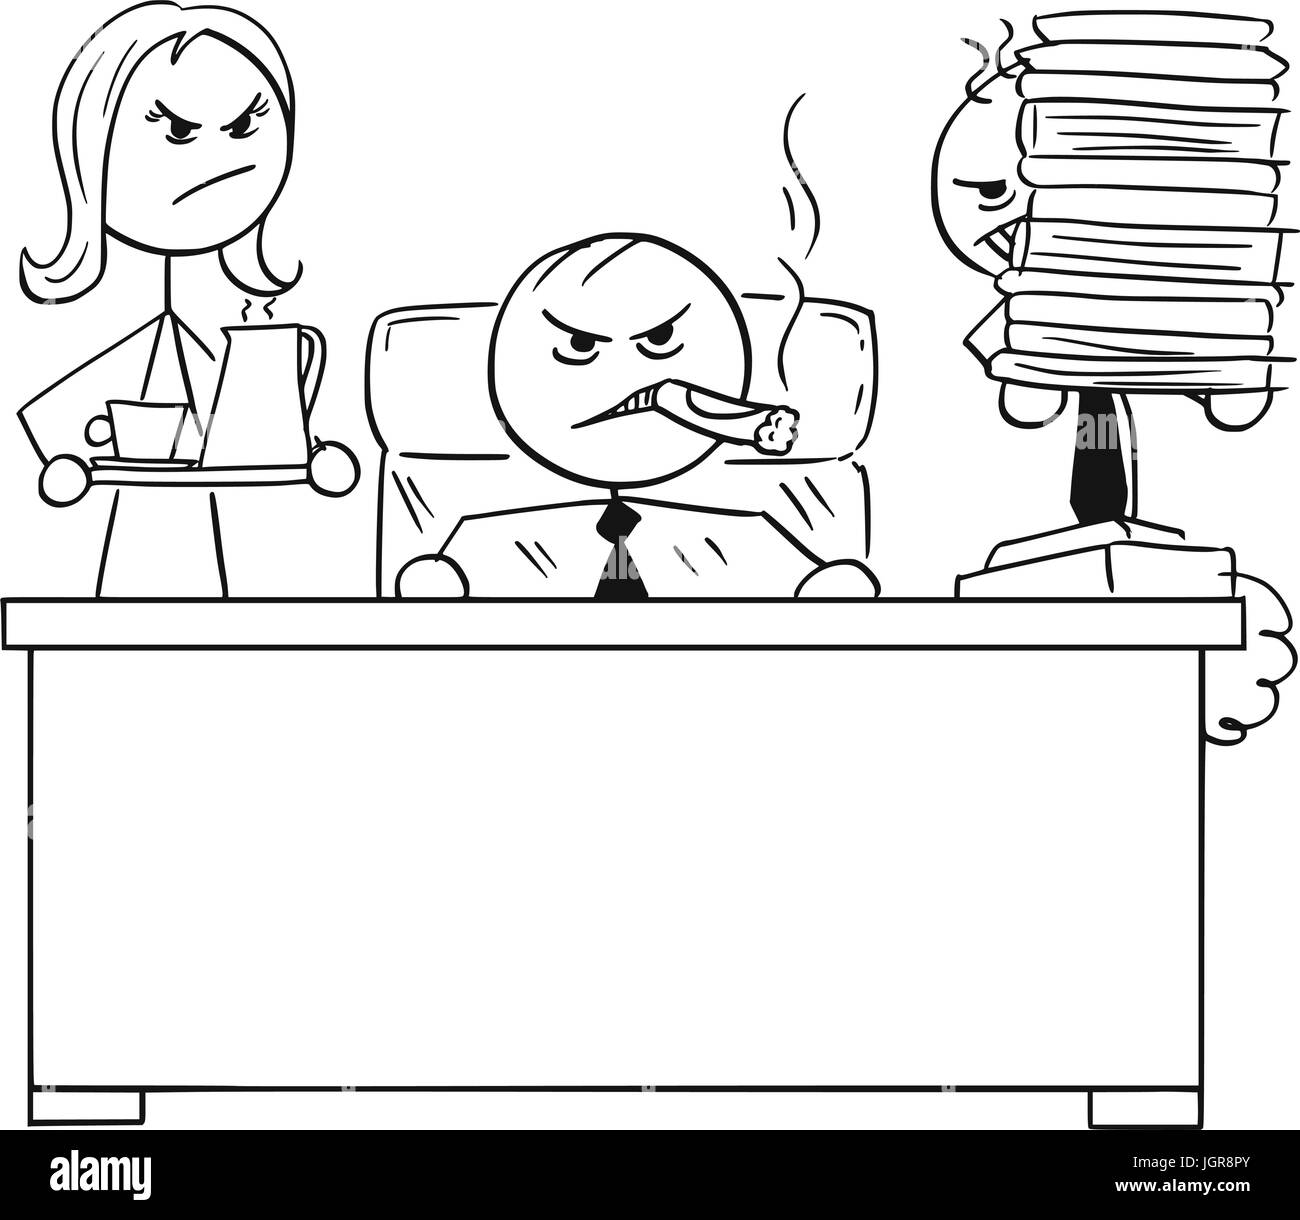 Cartoon vector stick man stickman drawing of angry boss with big cigar sitting behind his desk with male assistant and female secretary behind him Stock Vector Image & - Alamy